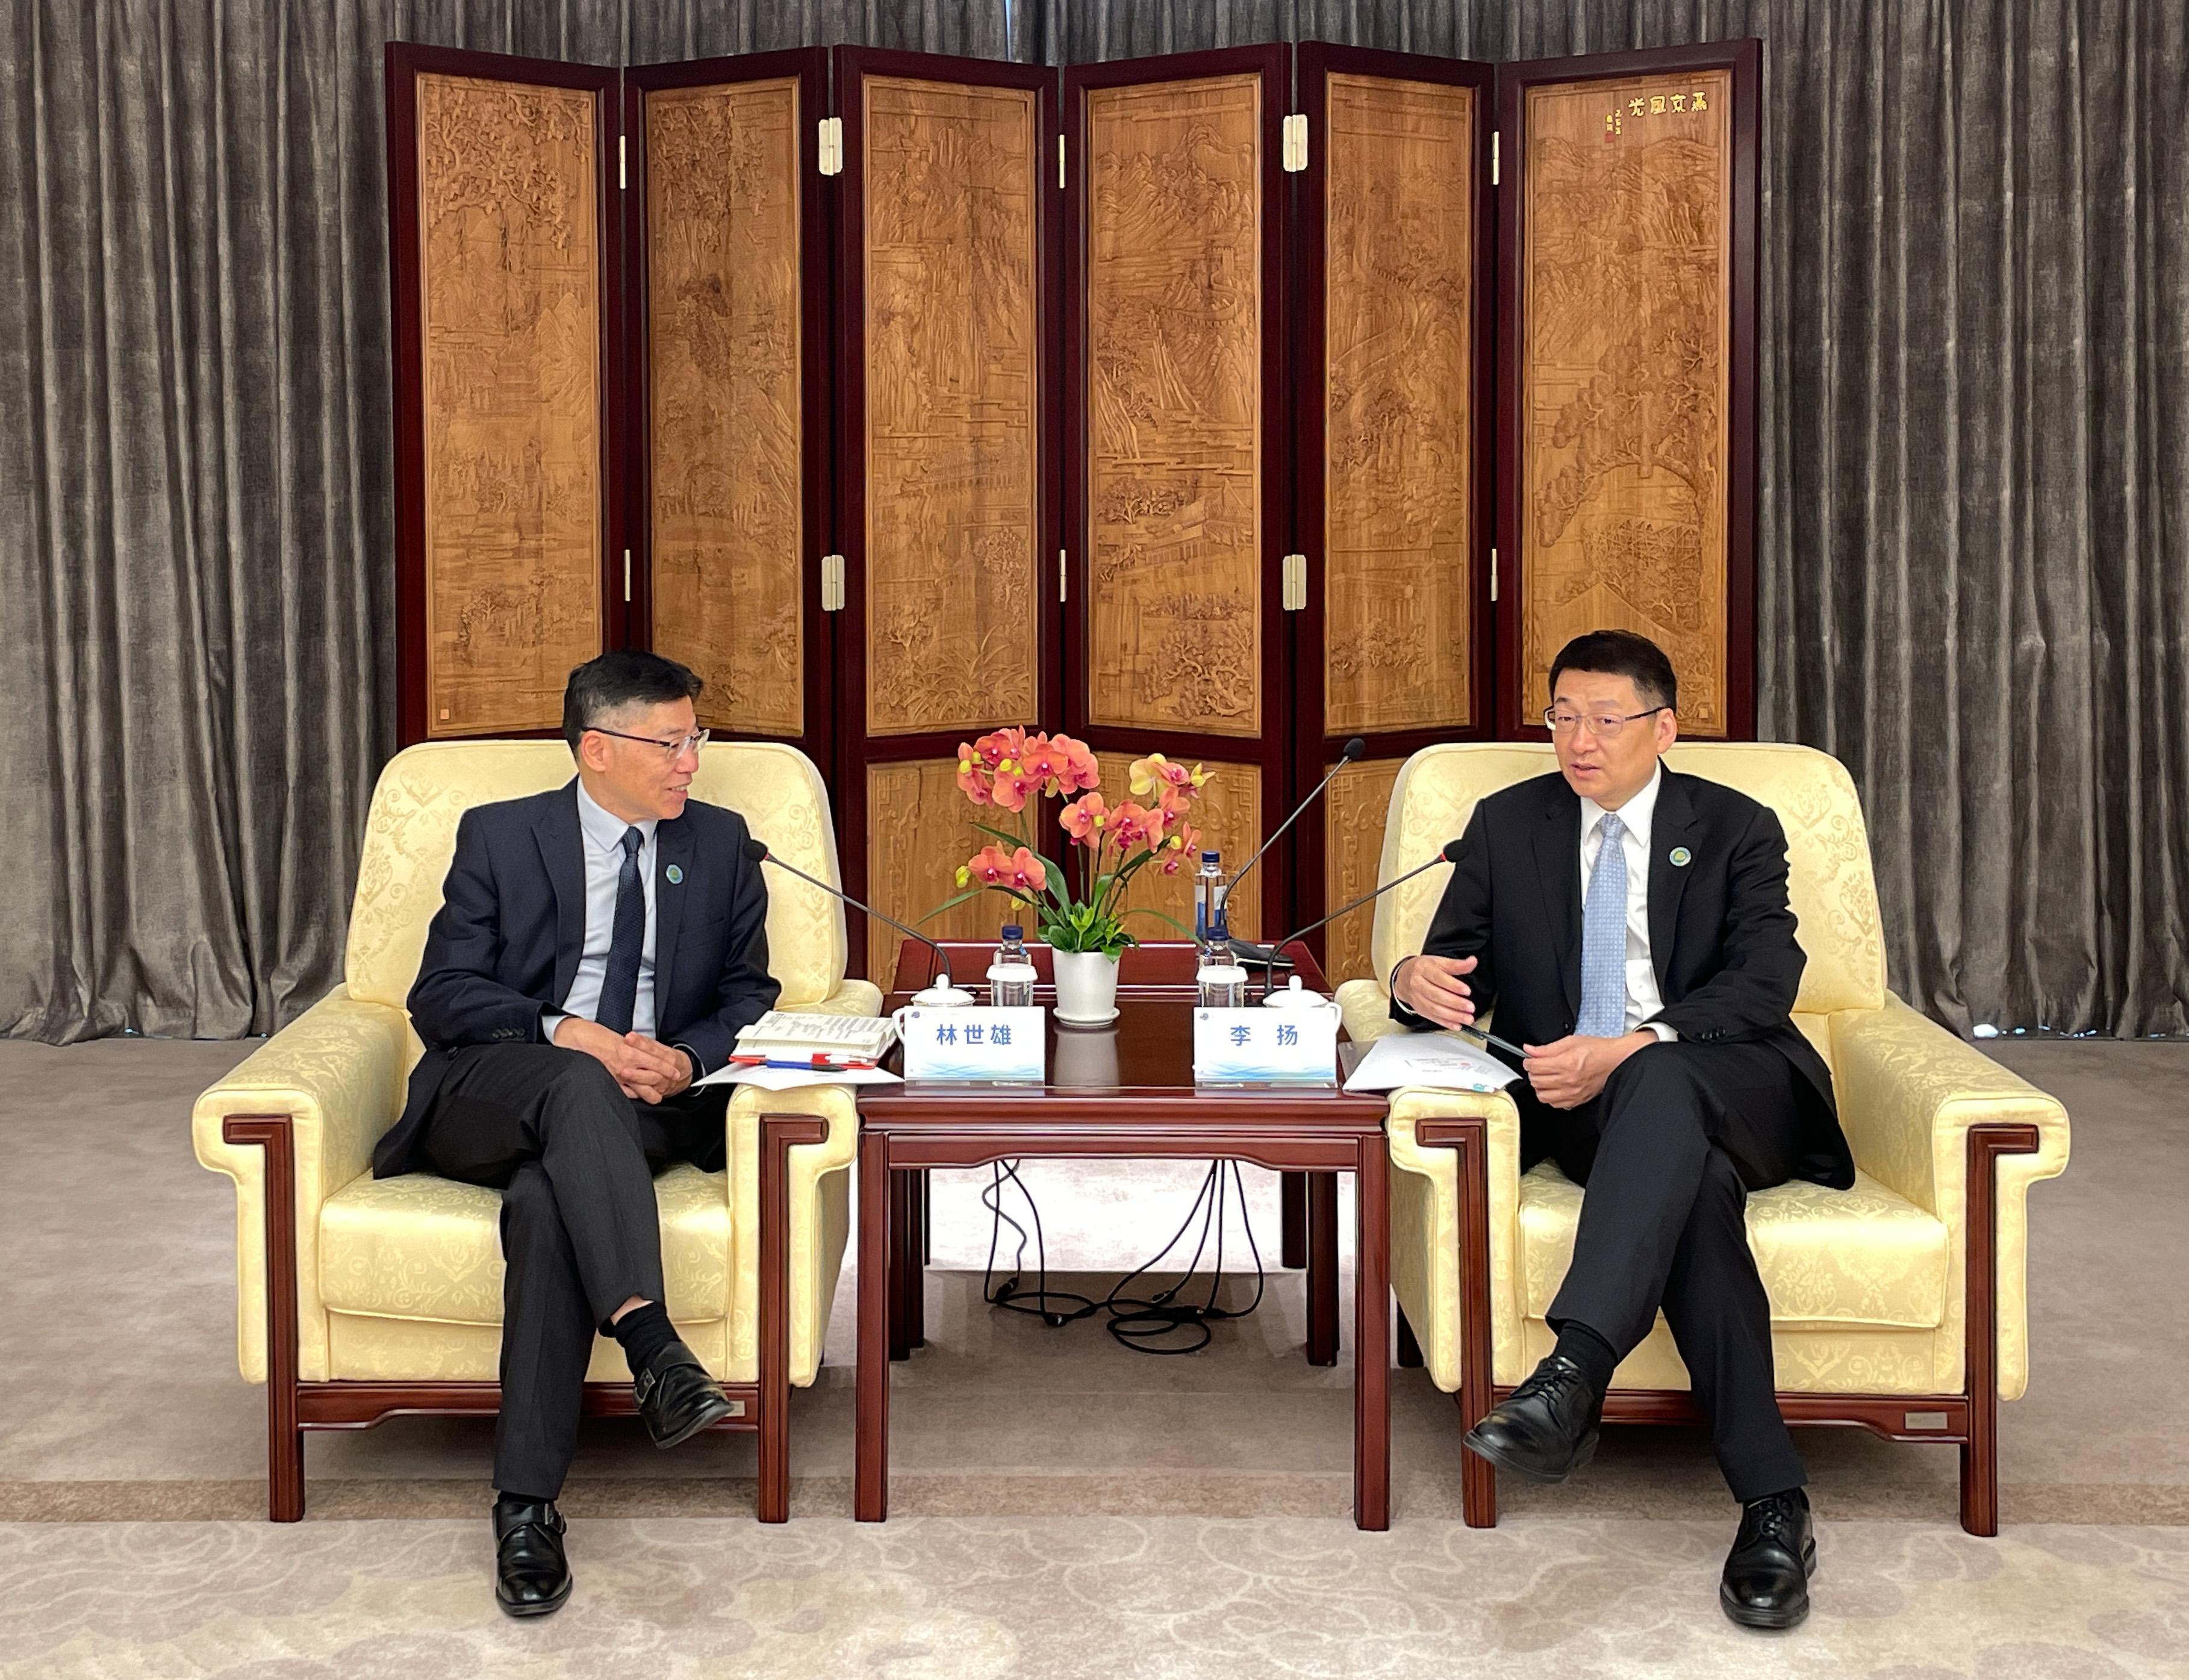 The Secretary for Transport and Logistics, Mr Lam Sai-hung (left), met with Vice Minister of Transport Mr Li Yang (right) on the sidelines of the Global Sustainable Transport Forum (2023) in Beijing, today (September 25) to exchange views on bilateral issues of mutual concern.